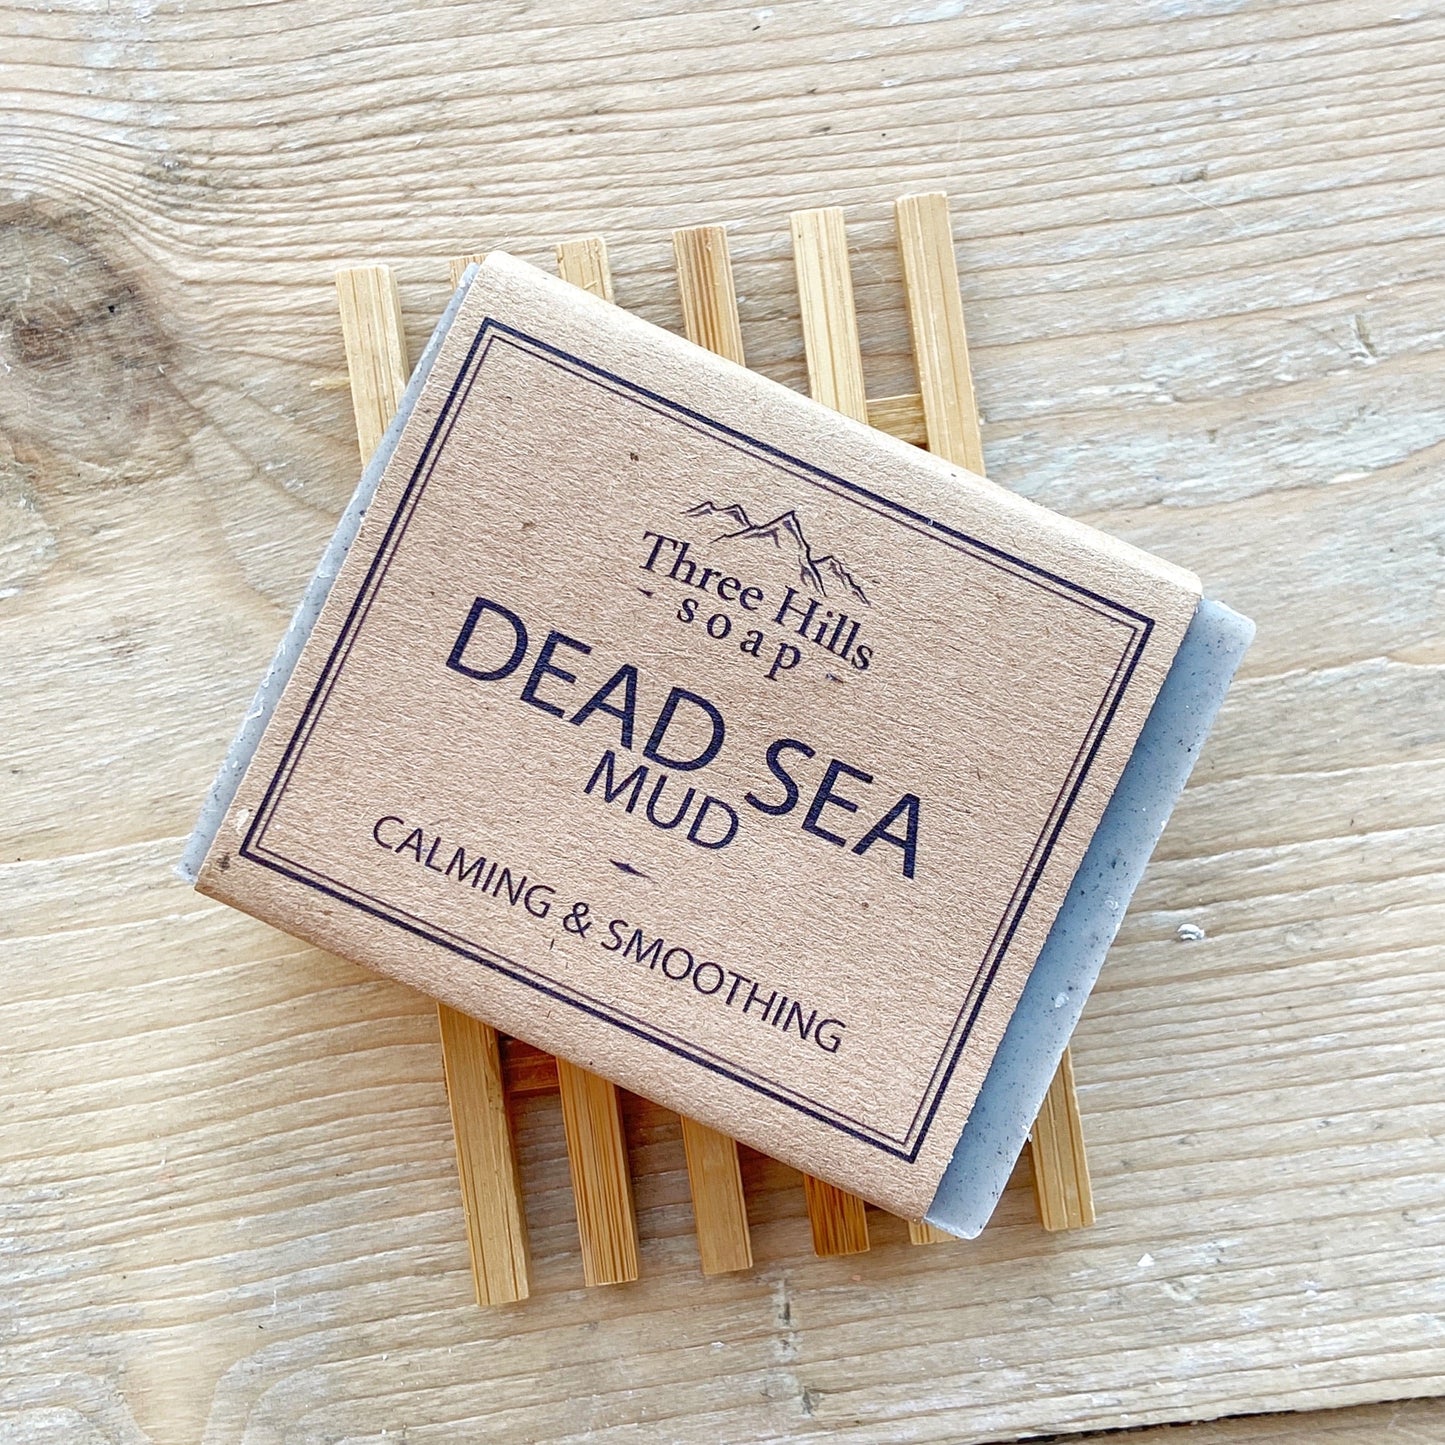 Bamboo Soap Dish - Eco-friendly soap holder made from bamboo